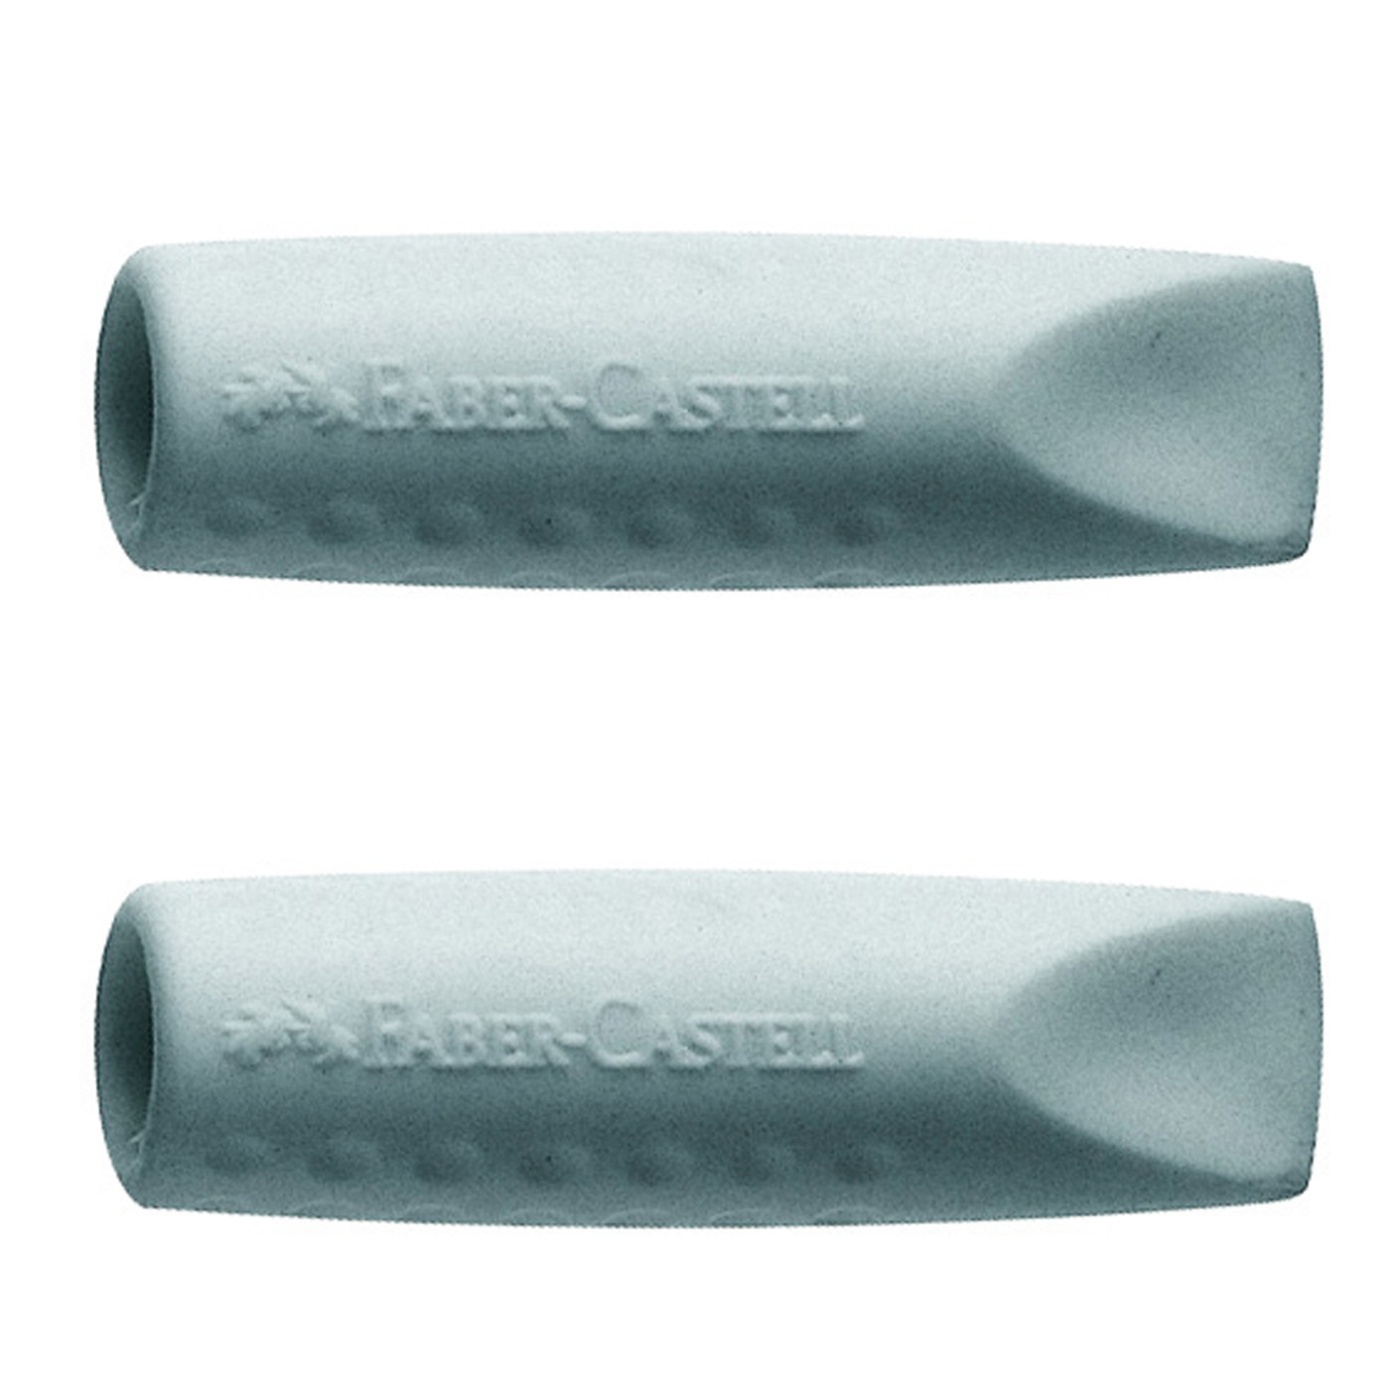 Grip 2001 Eraser Cap 2-pack in the group Pens / Pen Accessories / Erasers at Pen Store (101419)